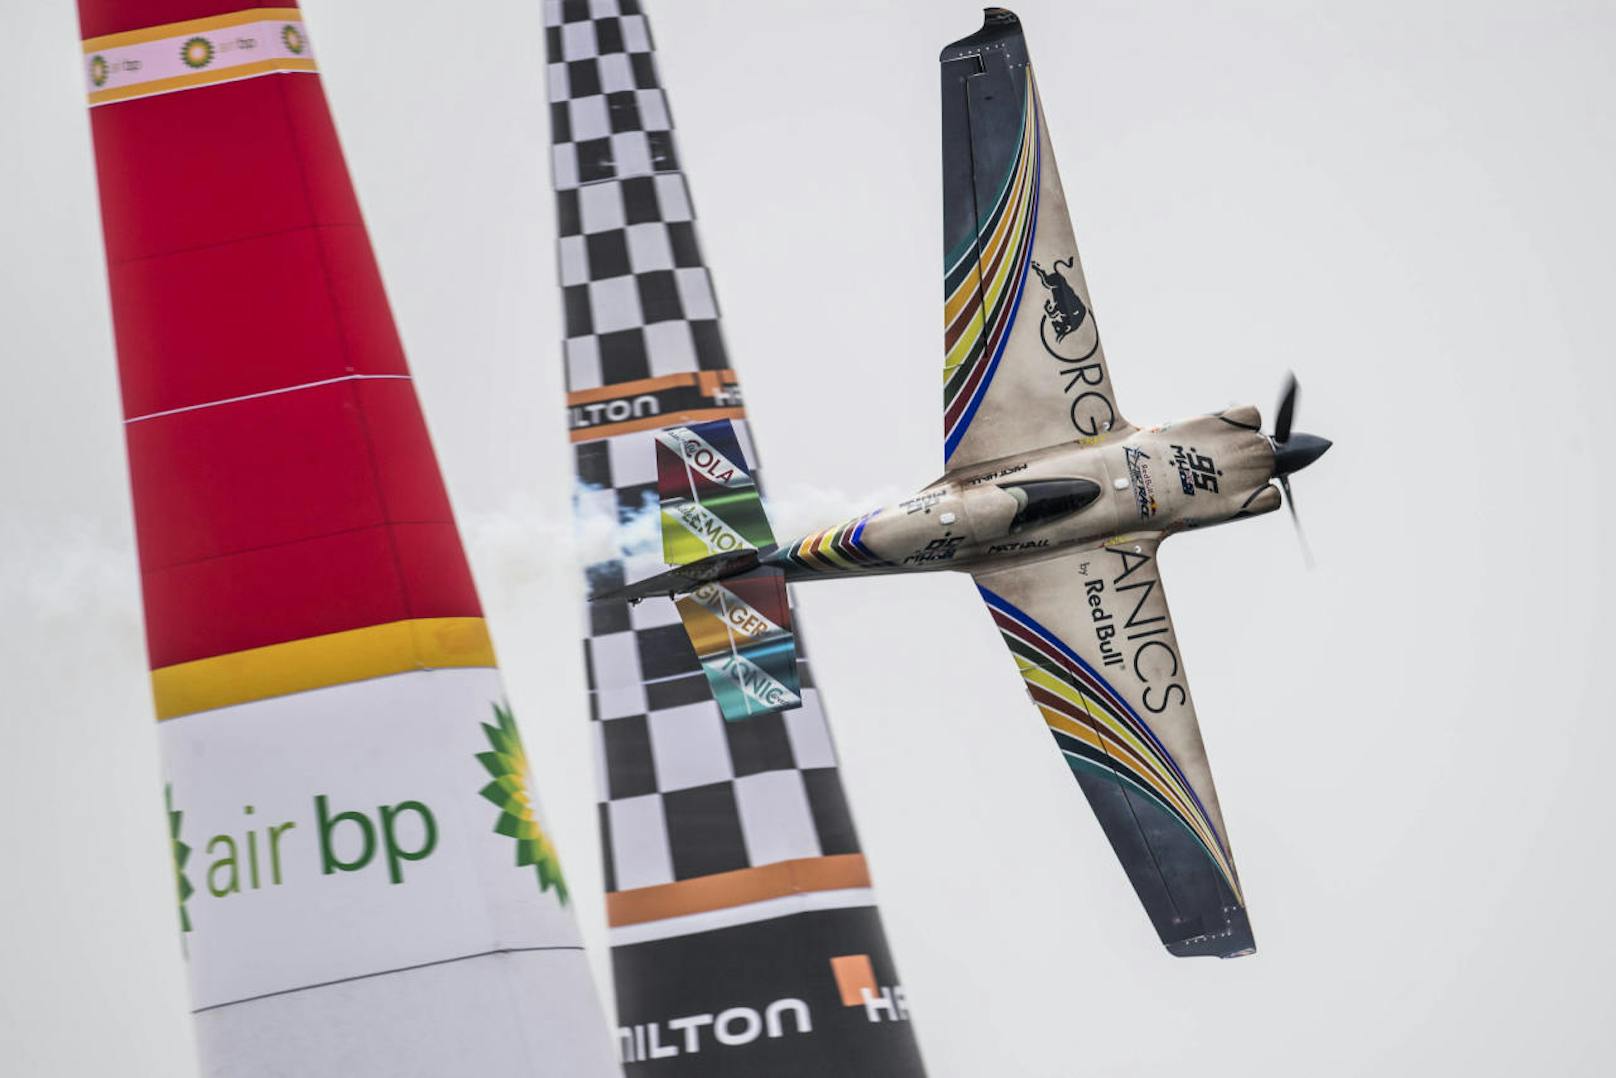 Matt Hall of Australia performs during qualifying day at the third round of the Red Bull Air Race World Championship in Chiba, Japan on May 26, 2018. // Joerg Mitter / Red Bull Content Pool // AP-1VSGDXQ452112 // Usage for editorial use only // Please go to www.redbullcontentpool.com for further information. //  Credit: Joerg Mitter / Red Bull Content Pool